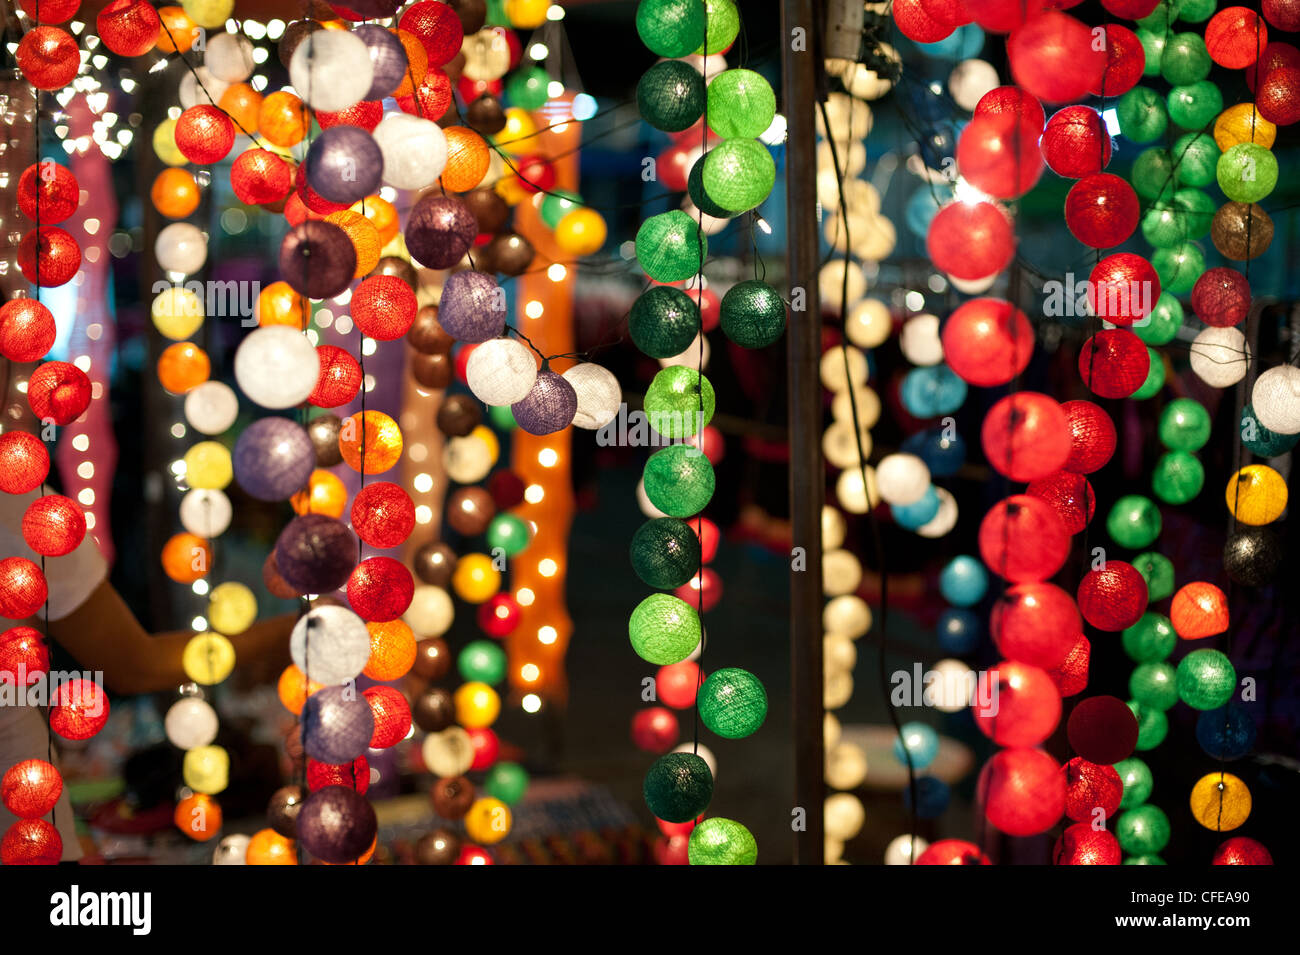 Colourful Lights. Stock Photo